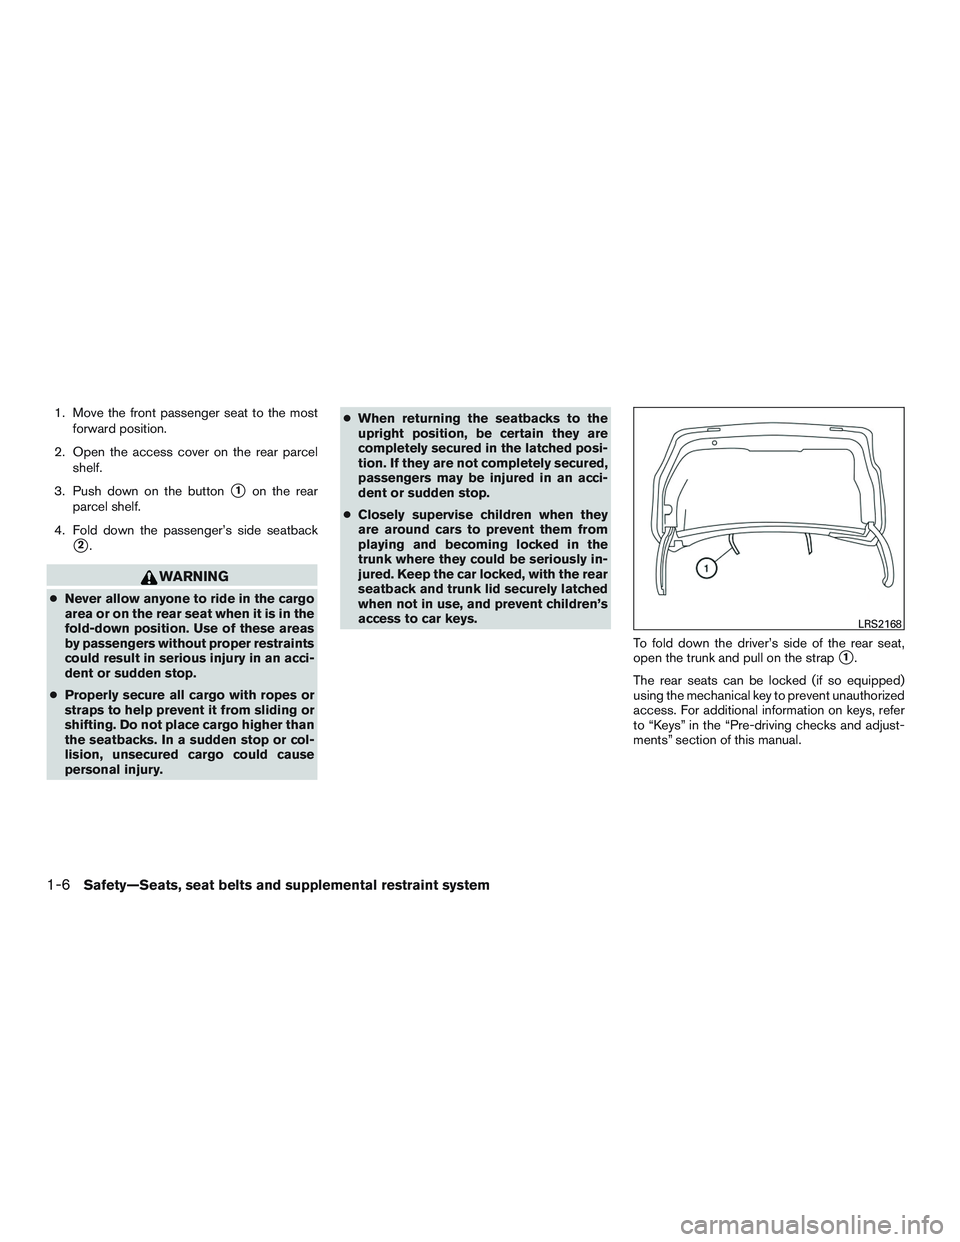 NISSAN ALTIMA SEDAN 2015 Owners Manual 1. Move the front passenger seat to the mostforward position.
2. Open the access cover on the rear parcel shelf.
3. Push down on the button
1on the rear
parcel shelf.
4. Fold down the passenger’s s